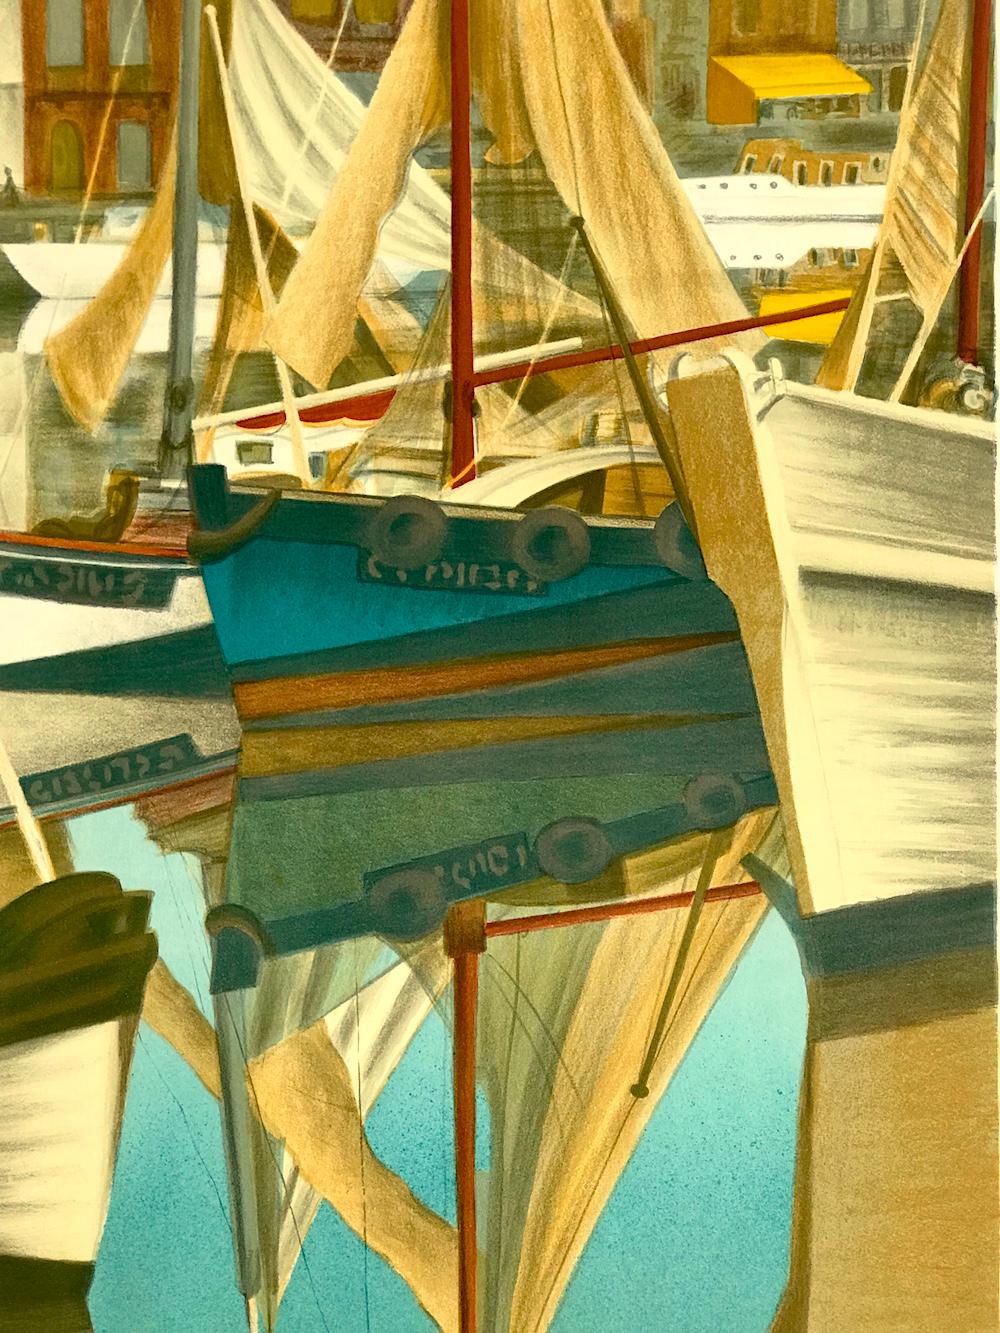 SUMMER DAY HONFLEUR Signed Lithograph, Sail Boats, Historic Port Normandy France - Print by Laurent Marcel Salinas